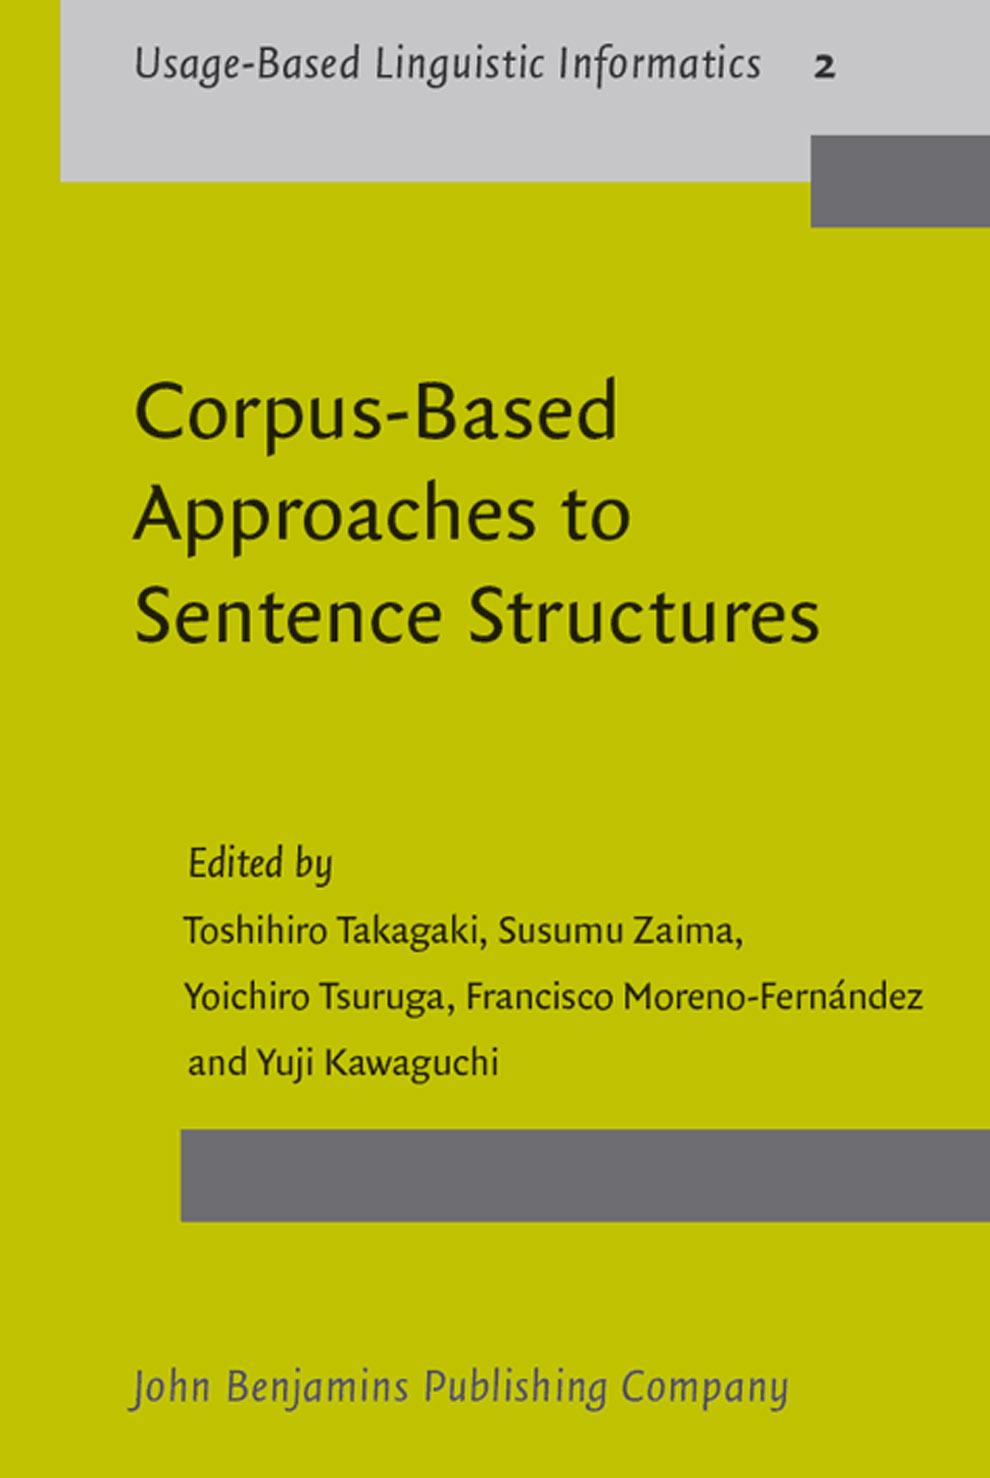 Corpus-based Approaches To Sentence Structures.jpg